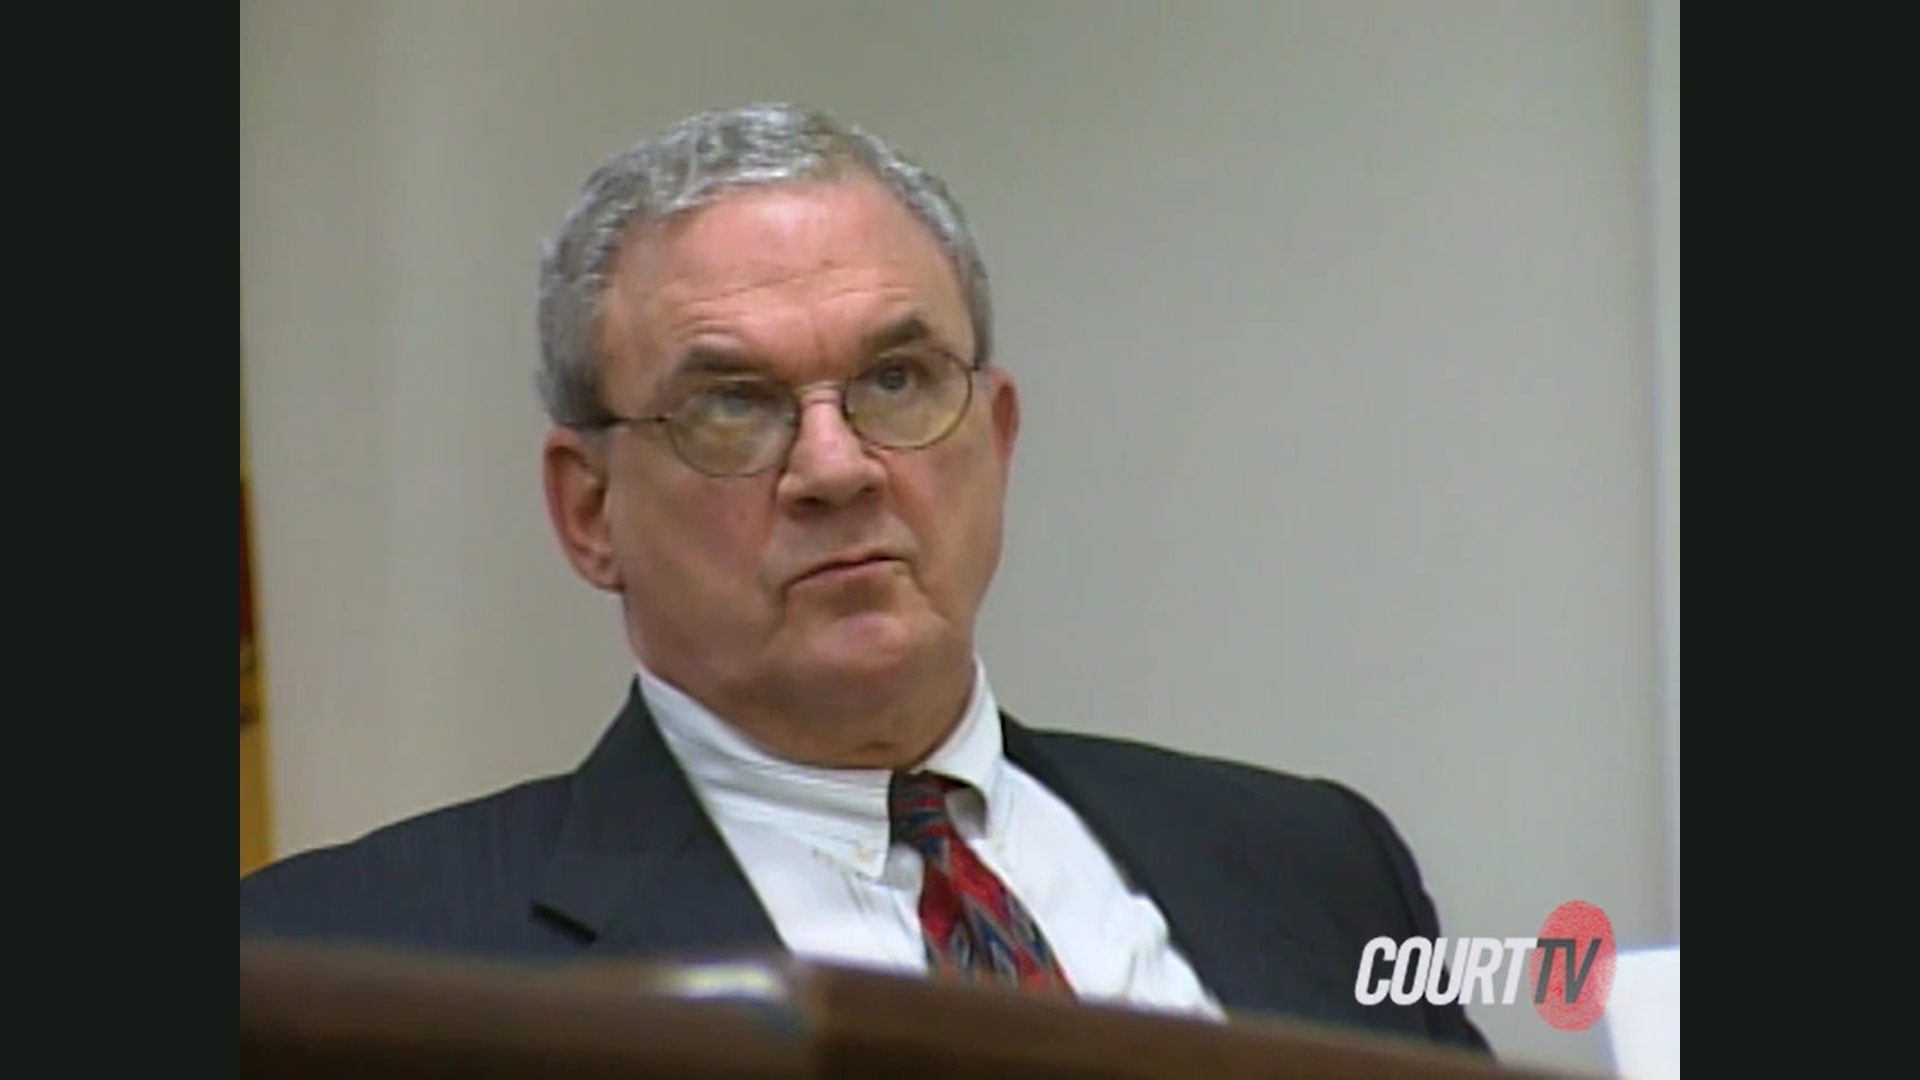 Fred Neulander’s 2001 trial was broadcast on Court TV. (Screengrab)